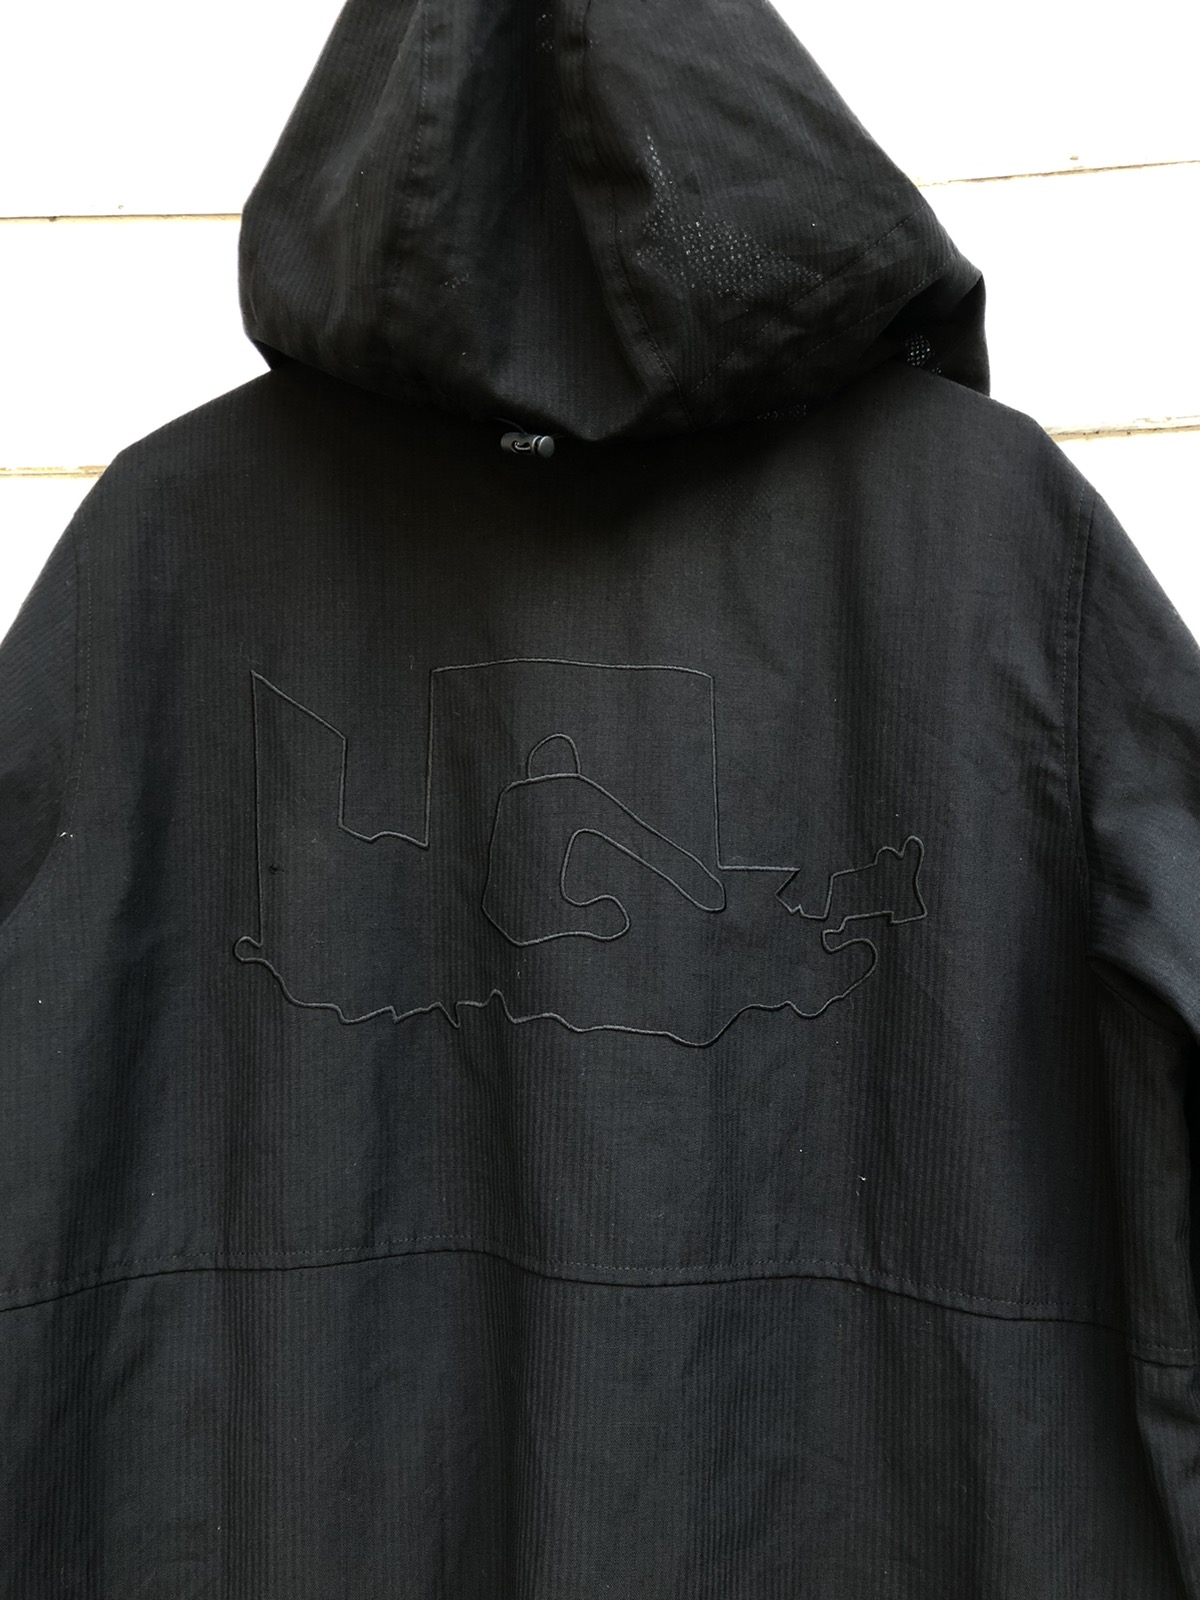 Undercoverism SS07 Embroidery Hooded Coat - 2